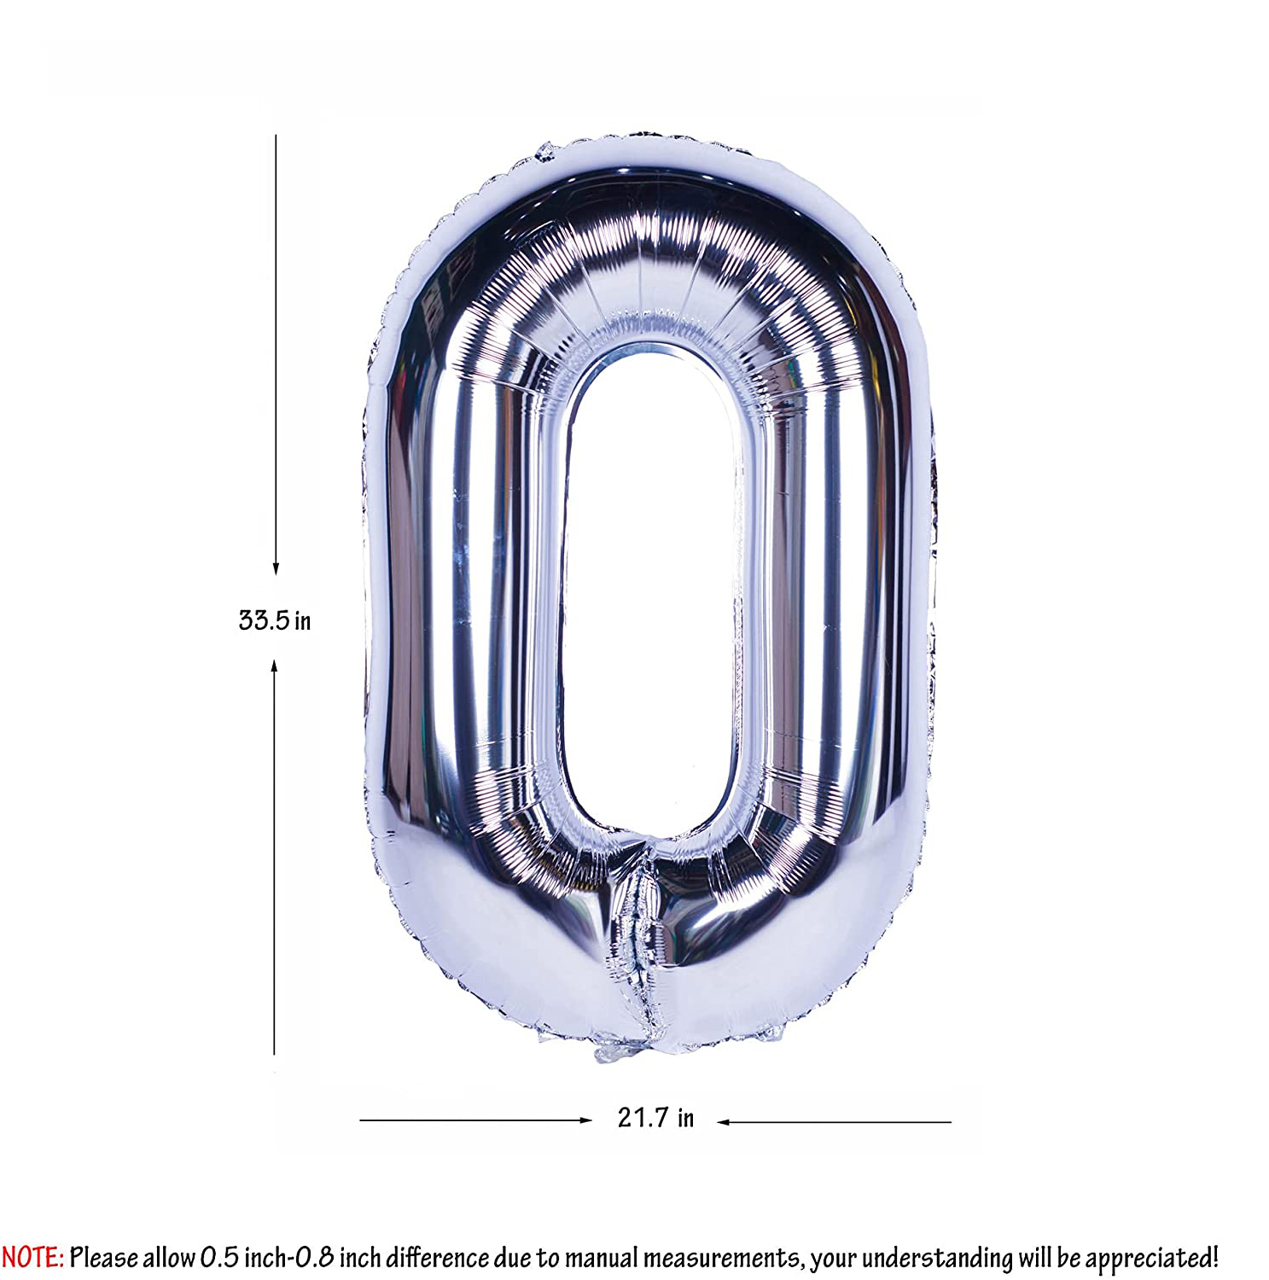 Picture of 40'' Foil Balloon Shape Number 0 - Silver (1pc)